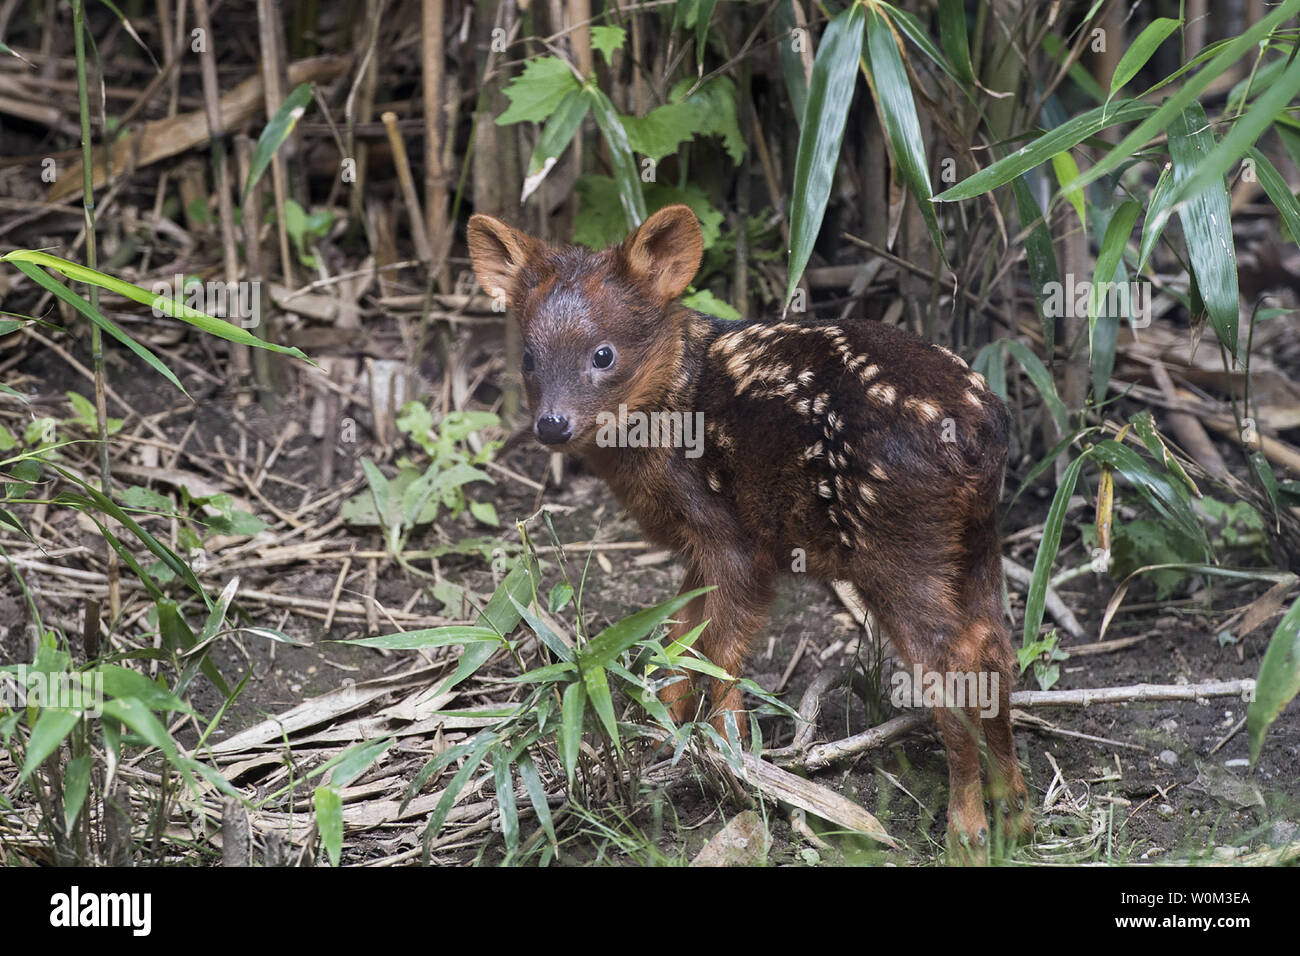 A southern pudu fawn (Pudu puda) - the world's smallest deer species - was  born at the WCS's (Wildlife Conservation Society) Queens Zoo. The Queens  Zoo has seen substantial success with its